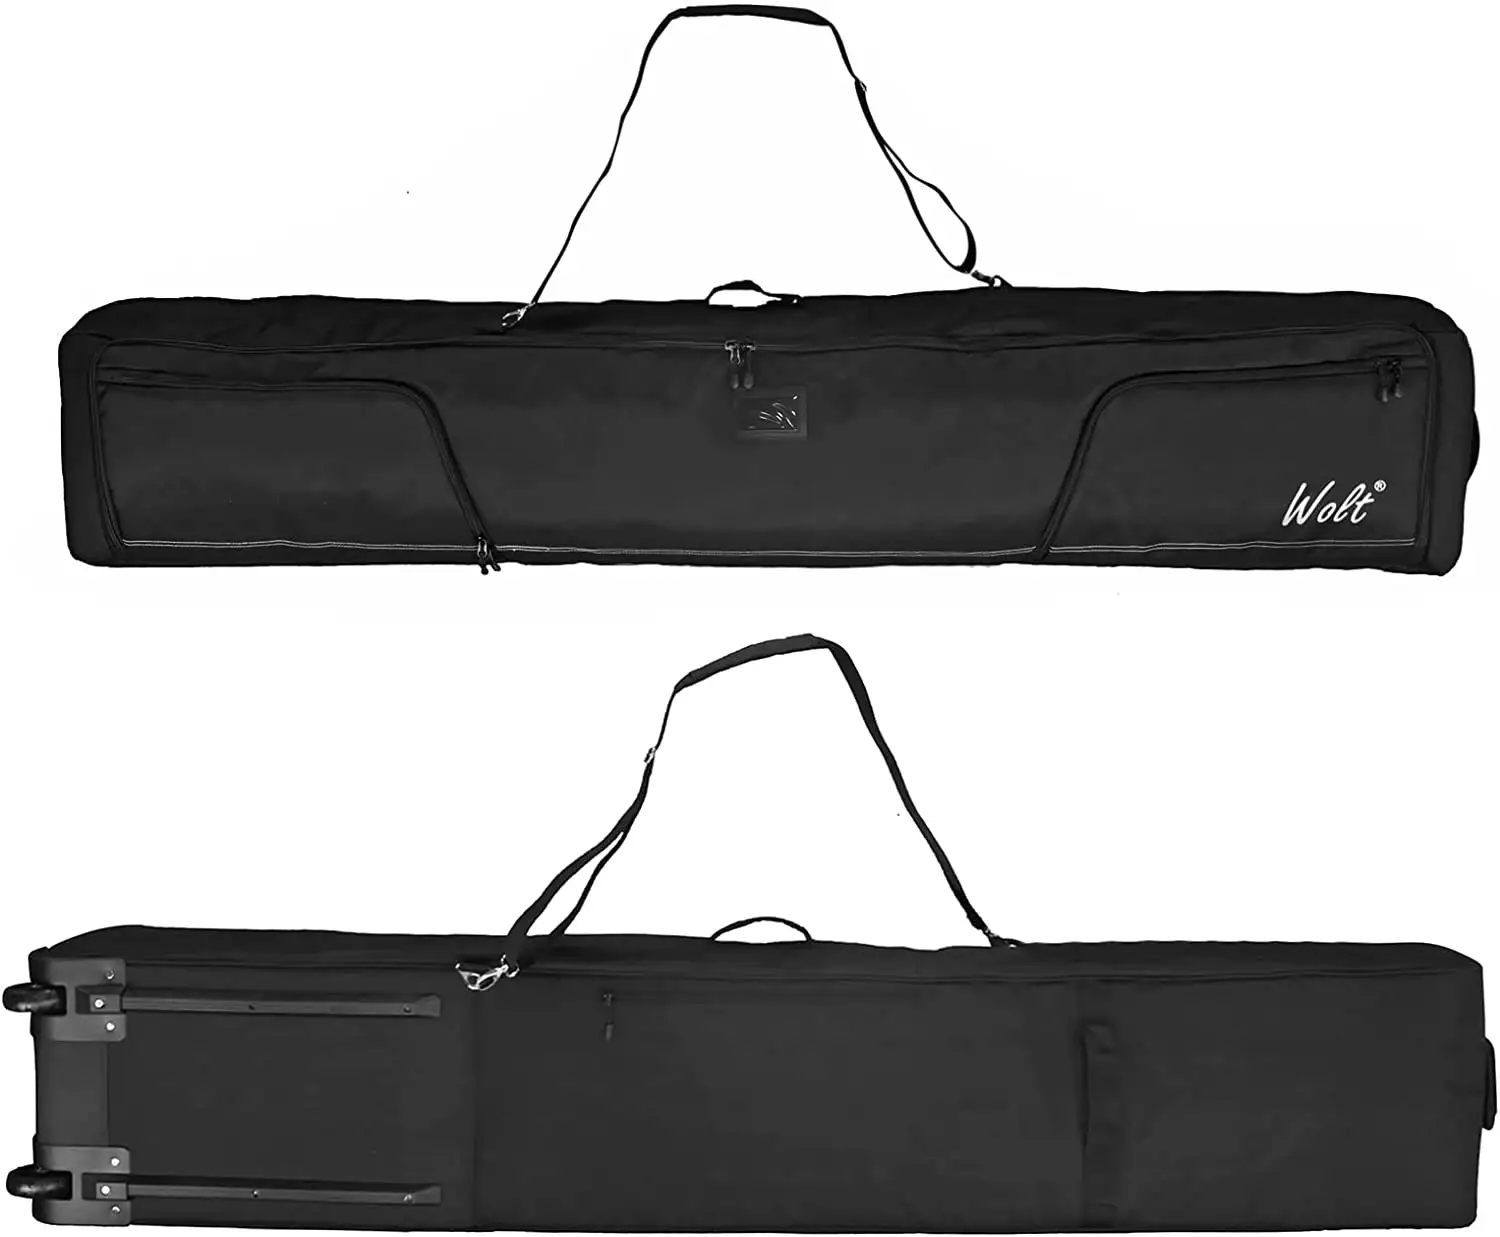 Rolling ski bag - Padded Snowboard Bag Carrier with Wheels for Air Travel, fit to Double Pairs of Skis up to 190cm